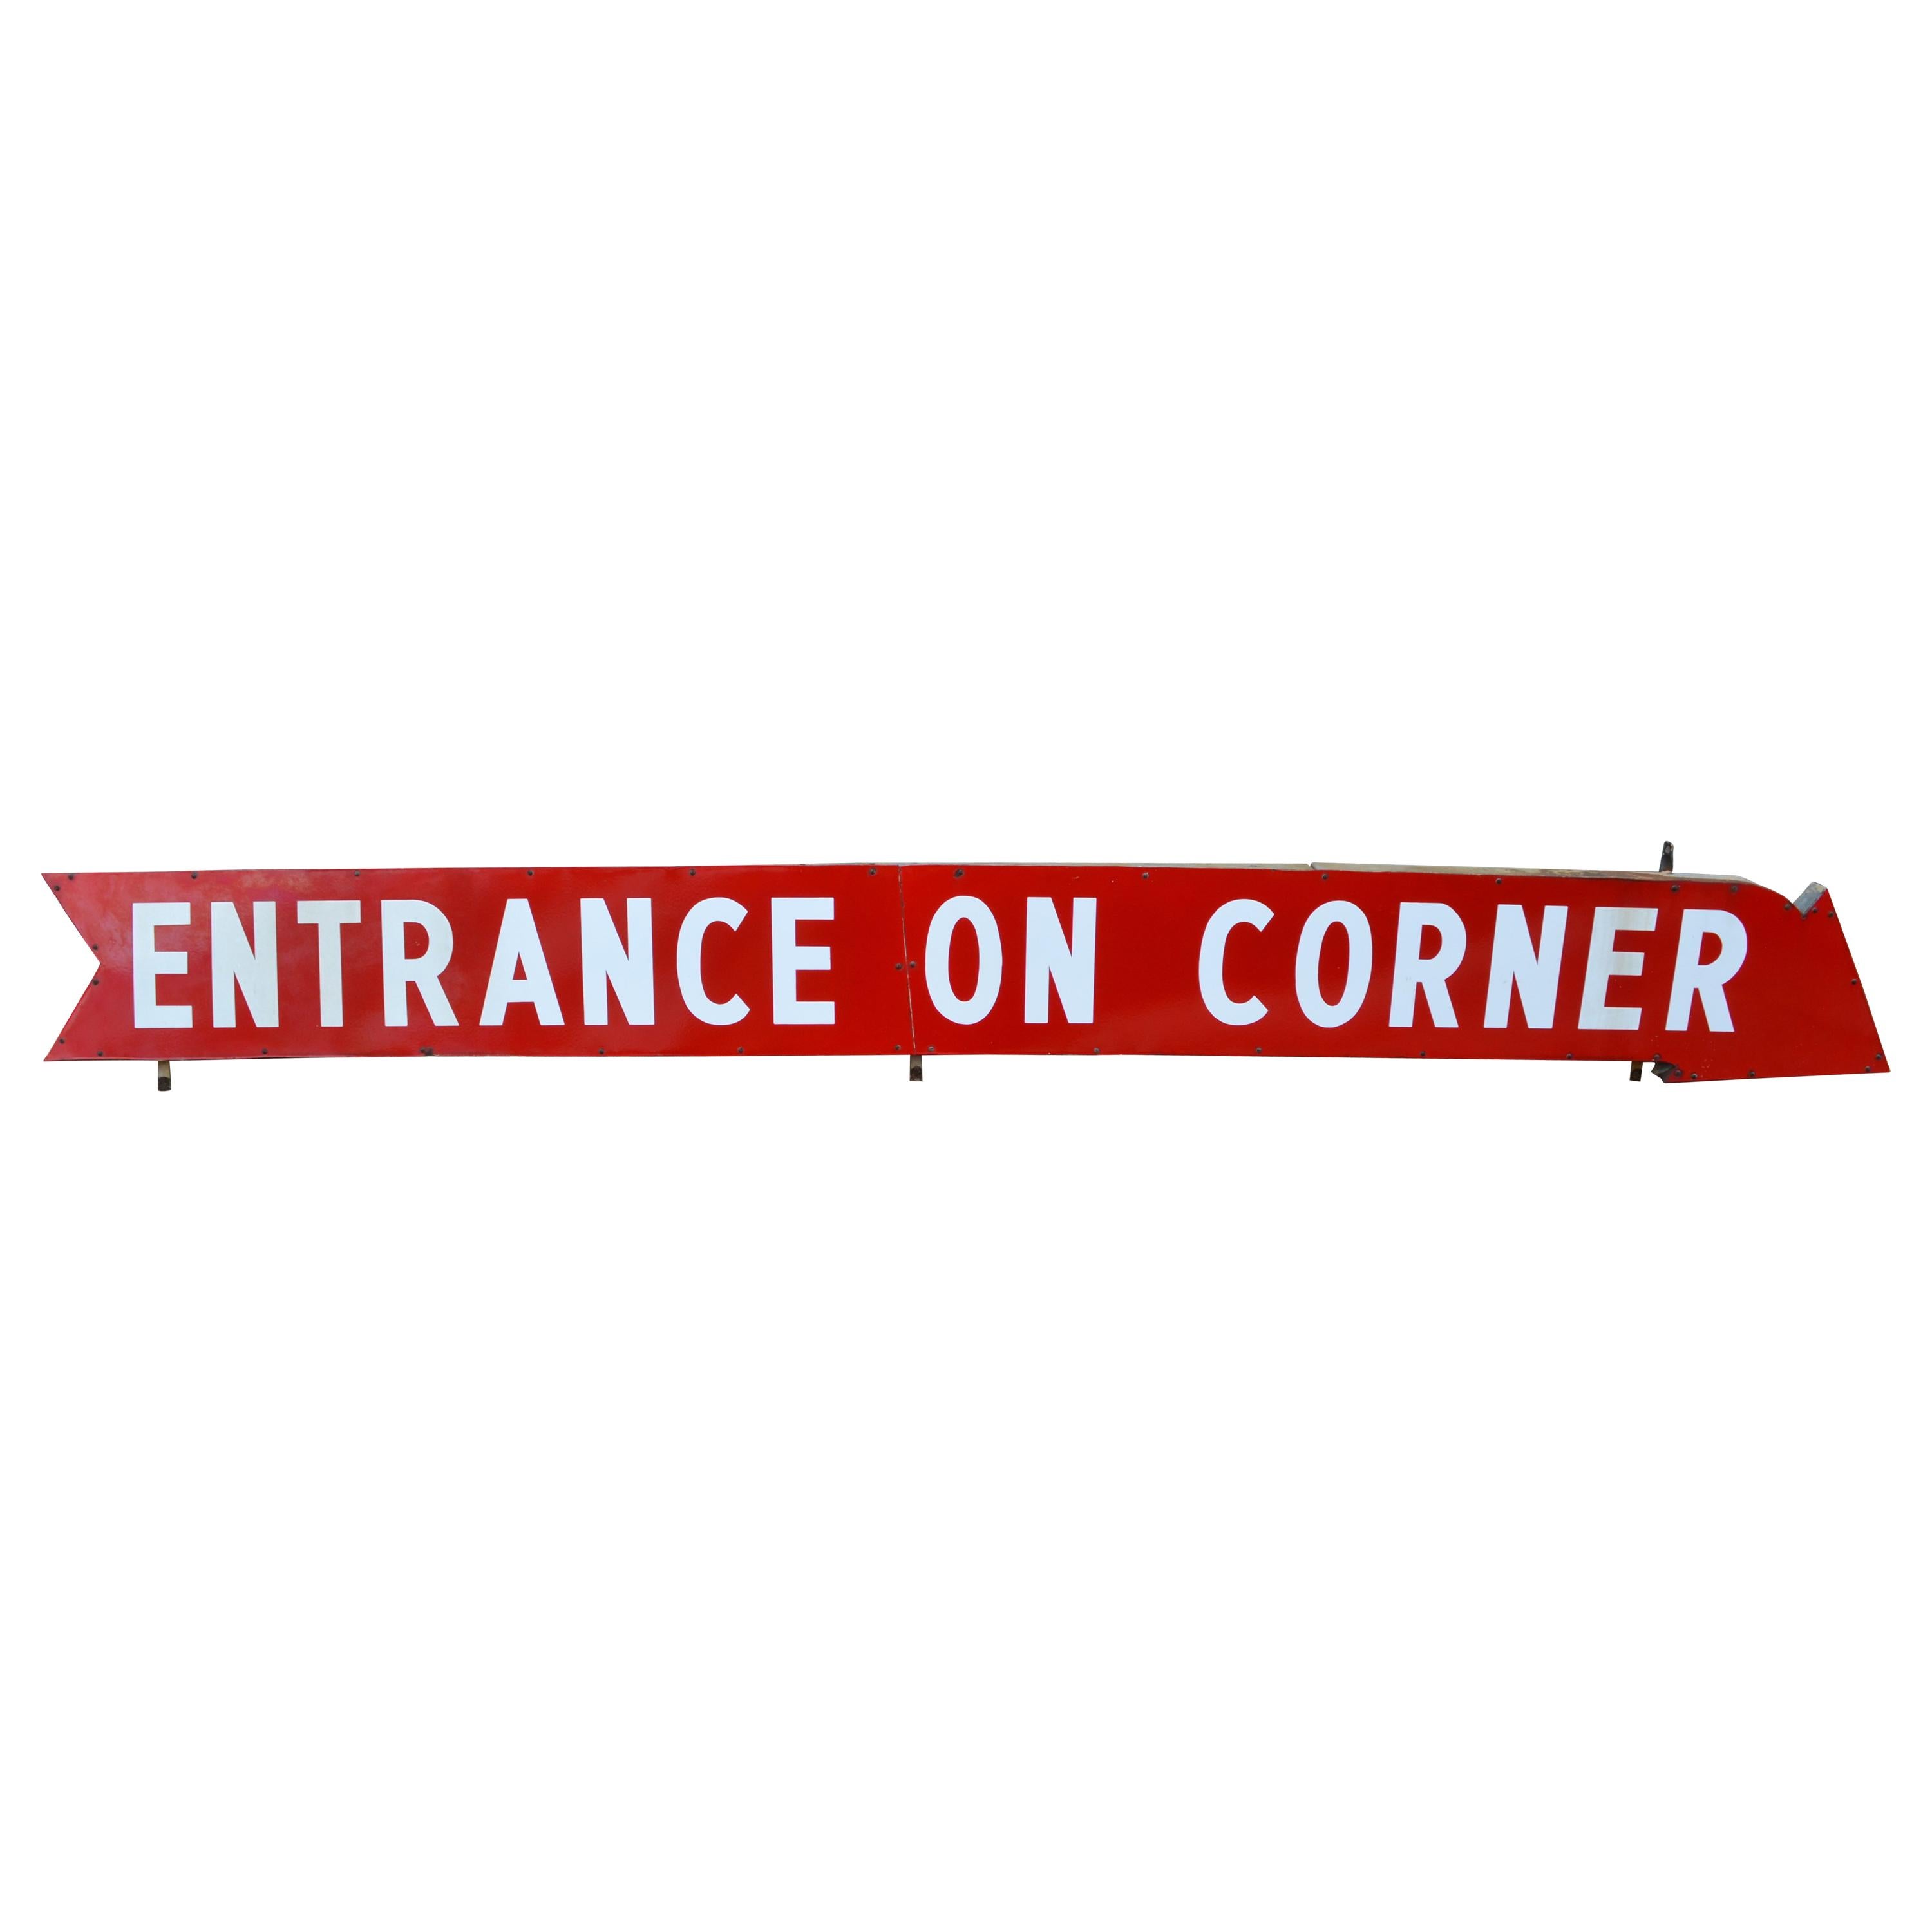 Sign as Arrow with Paint on Metal, circa 1930s "ENTRANCE ON CORNER"